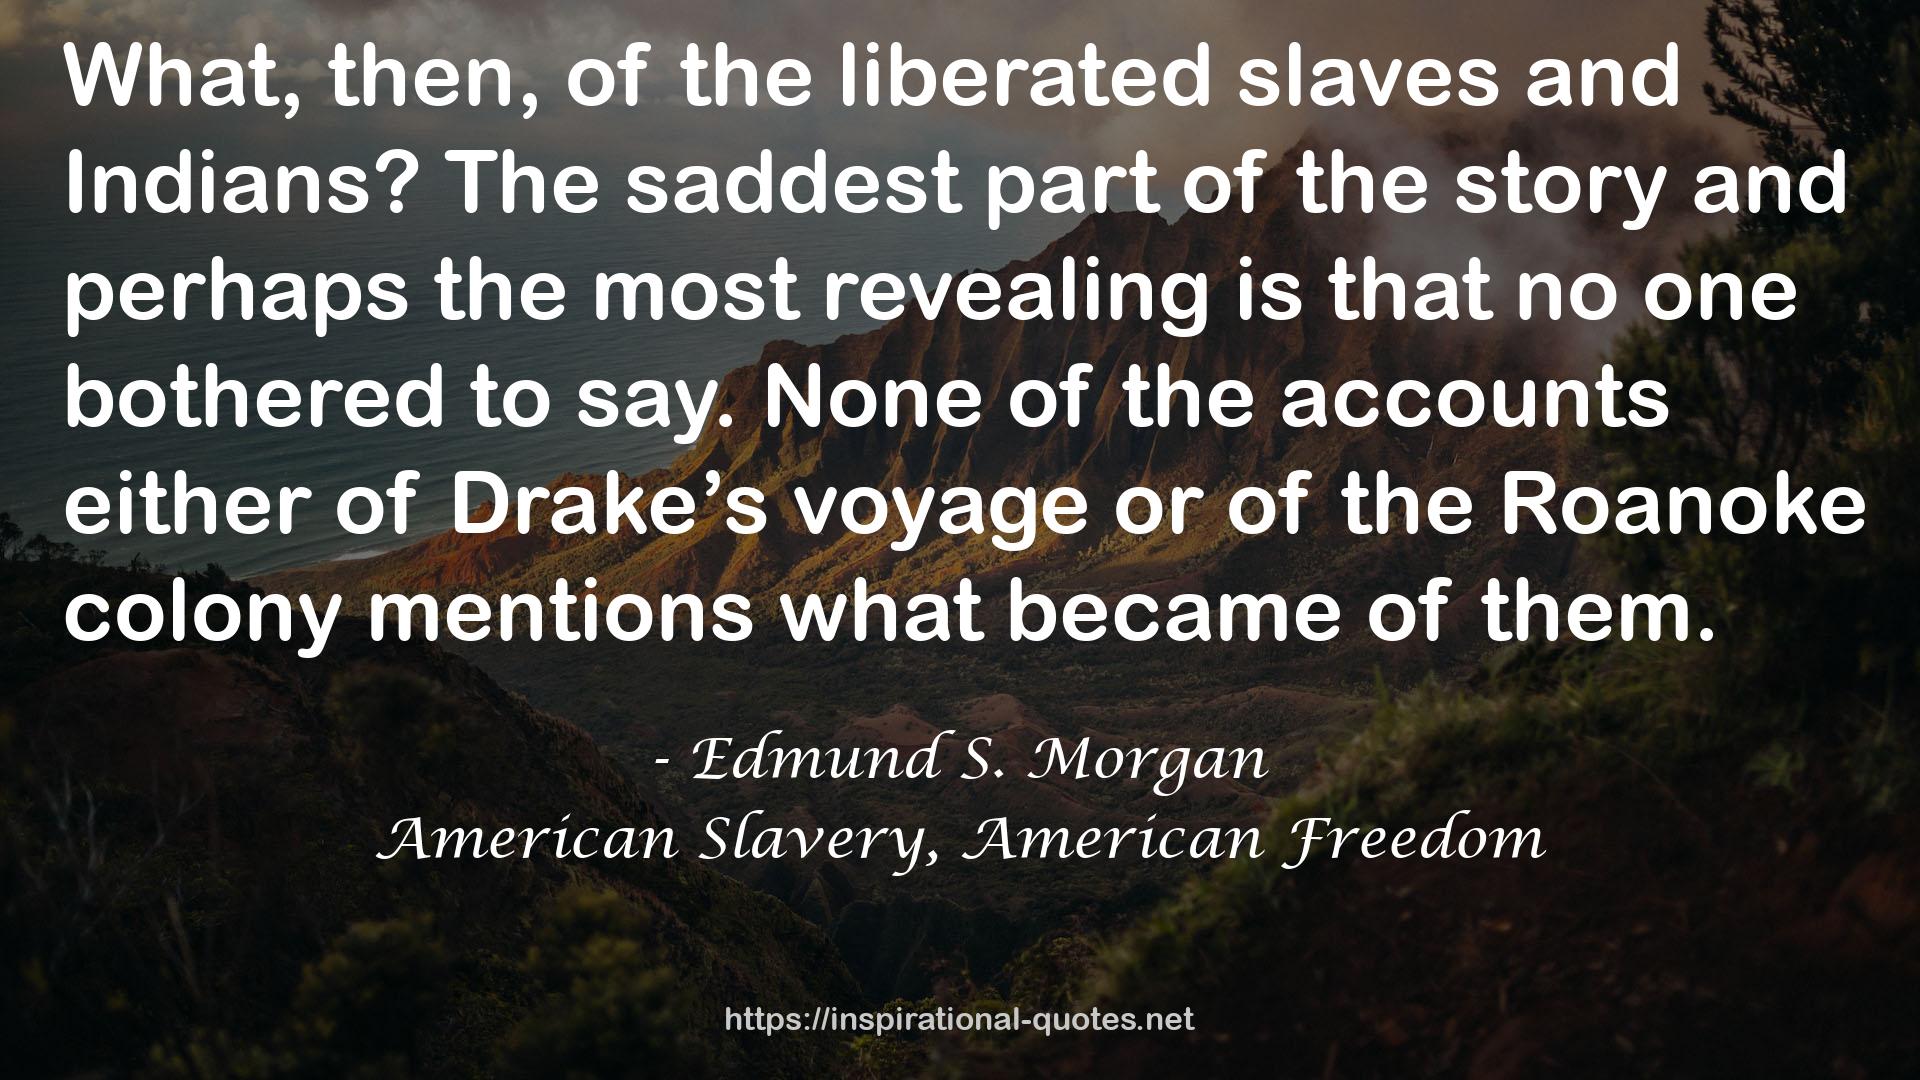 American Slavery, American Freedom QUOTES